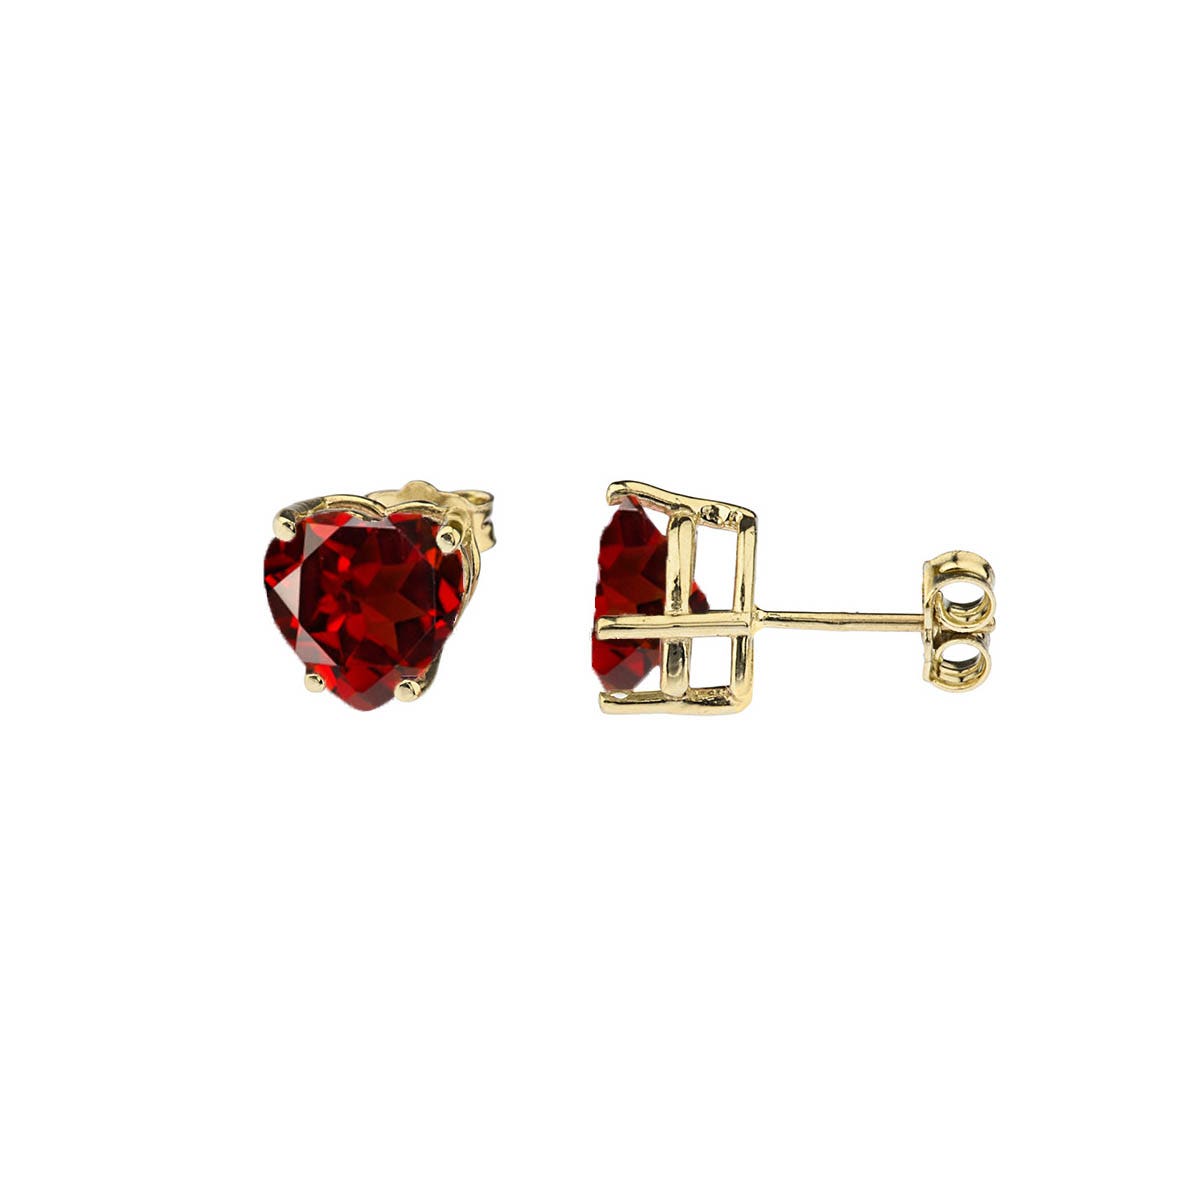 Gold Boutique - Mens Earrings in Rose GOOFASH